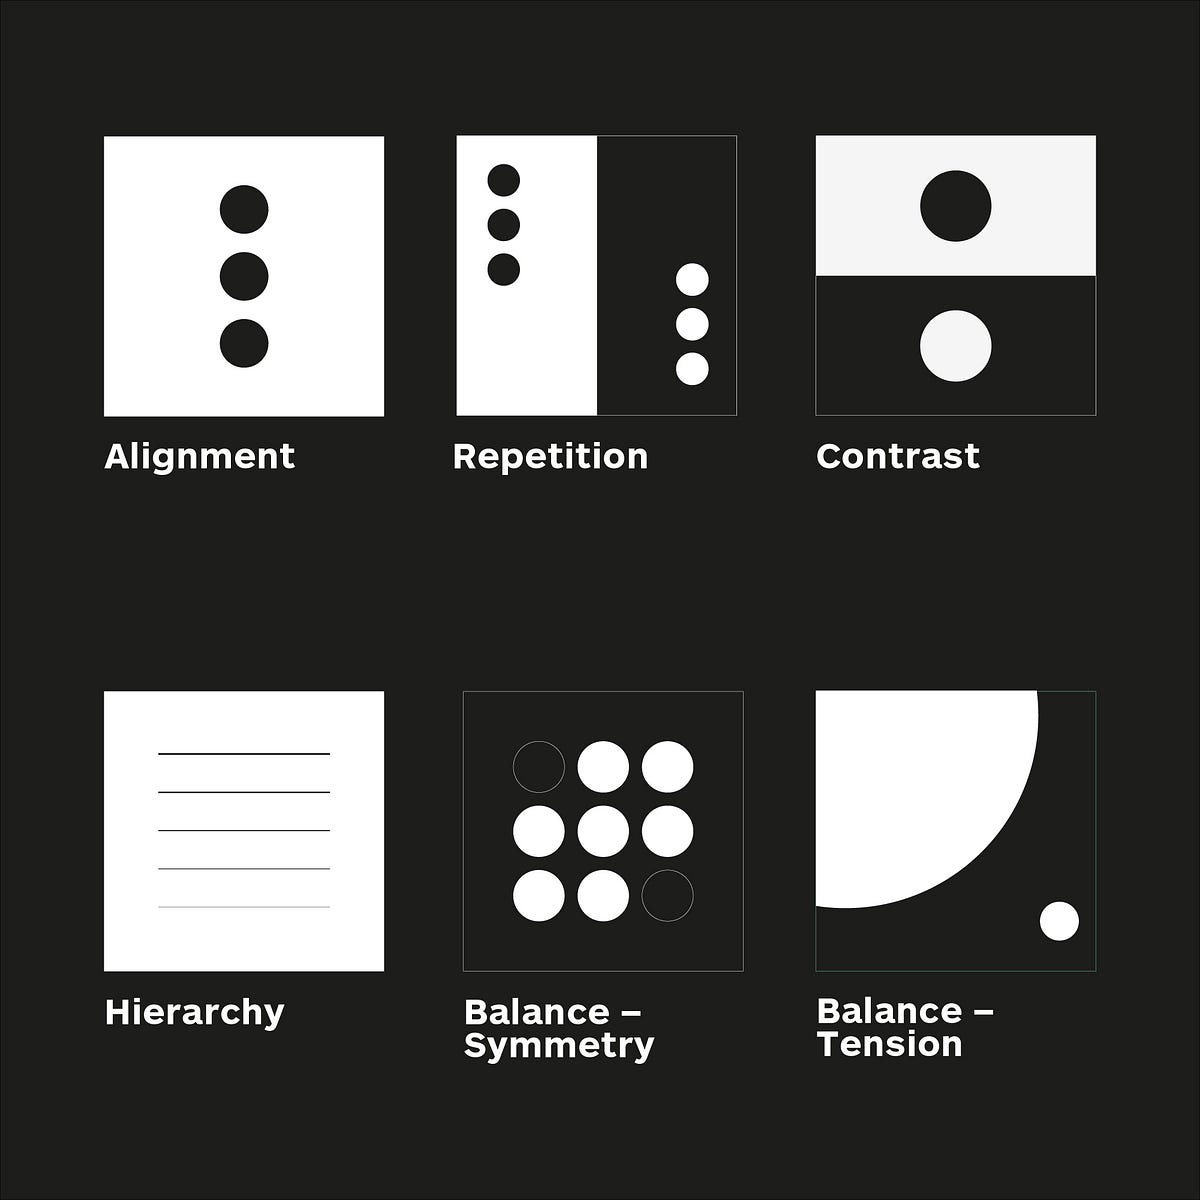 Why The Principles Of Design Are Important And How They Impact Good